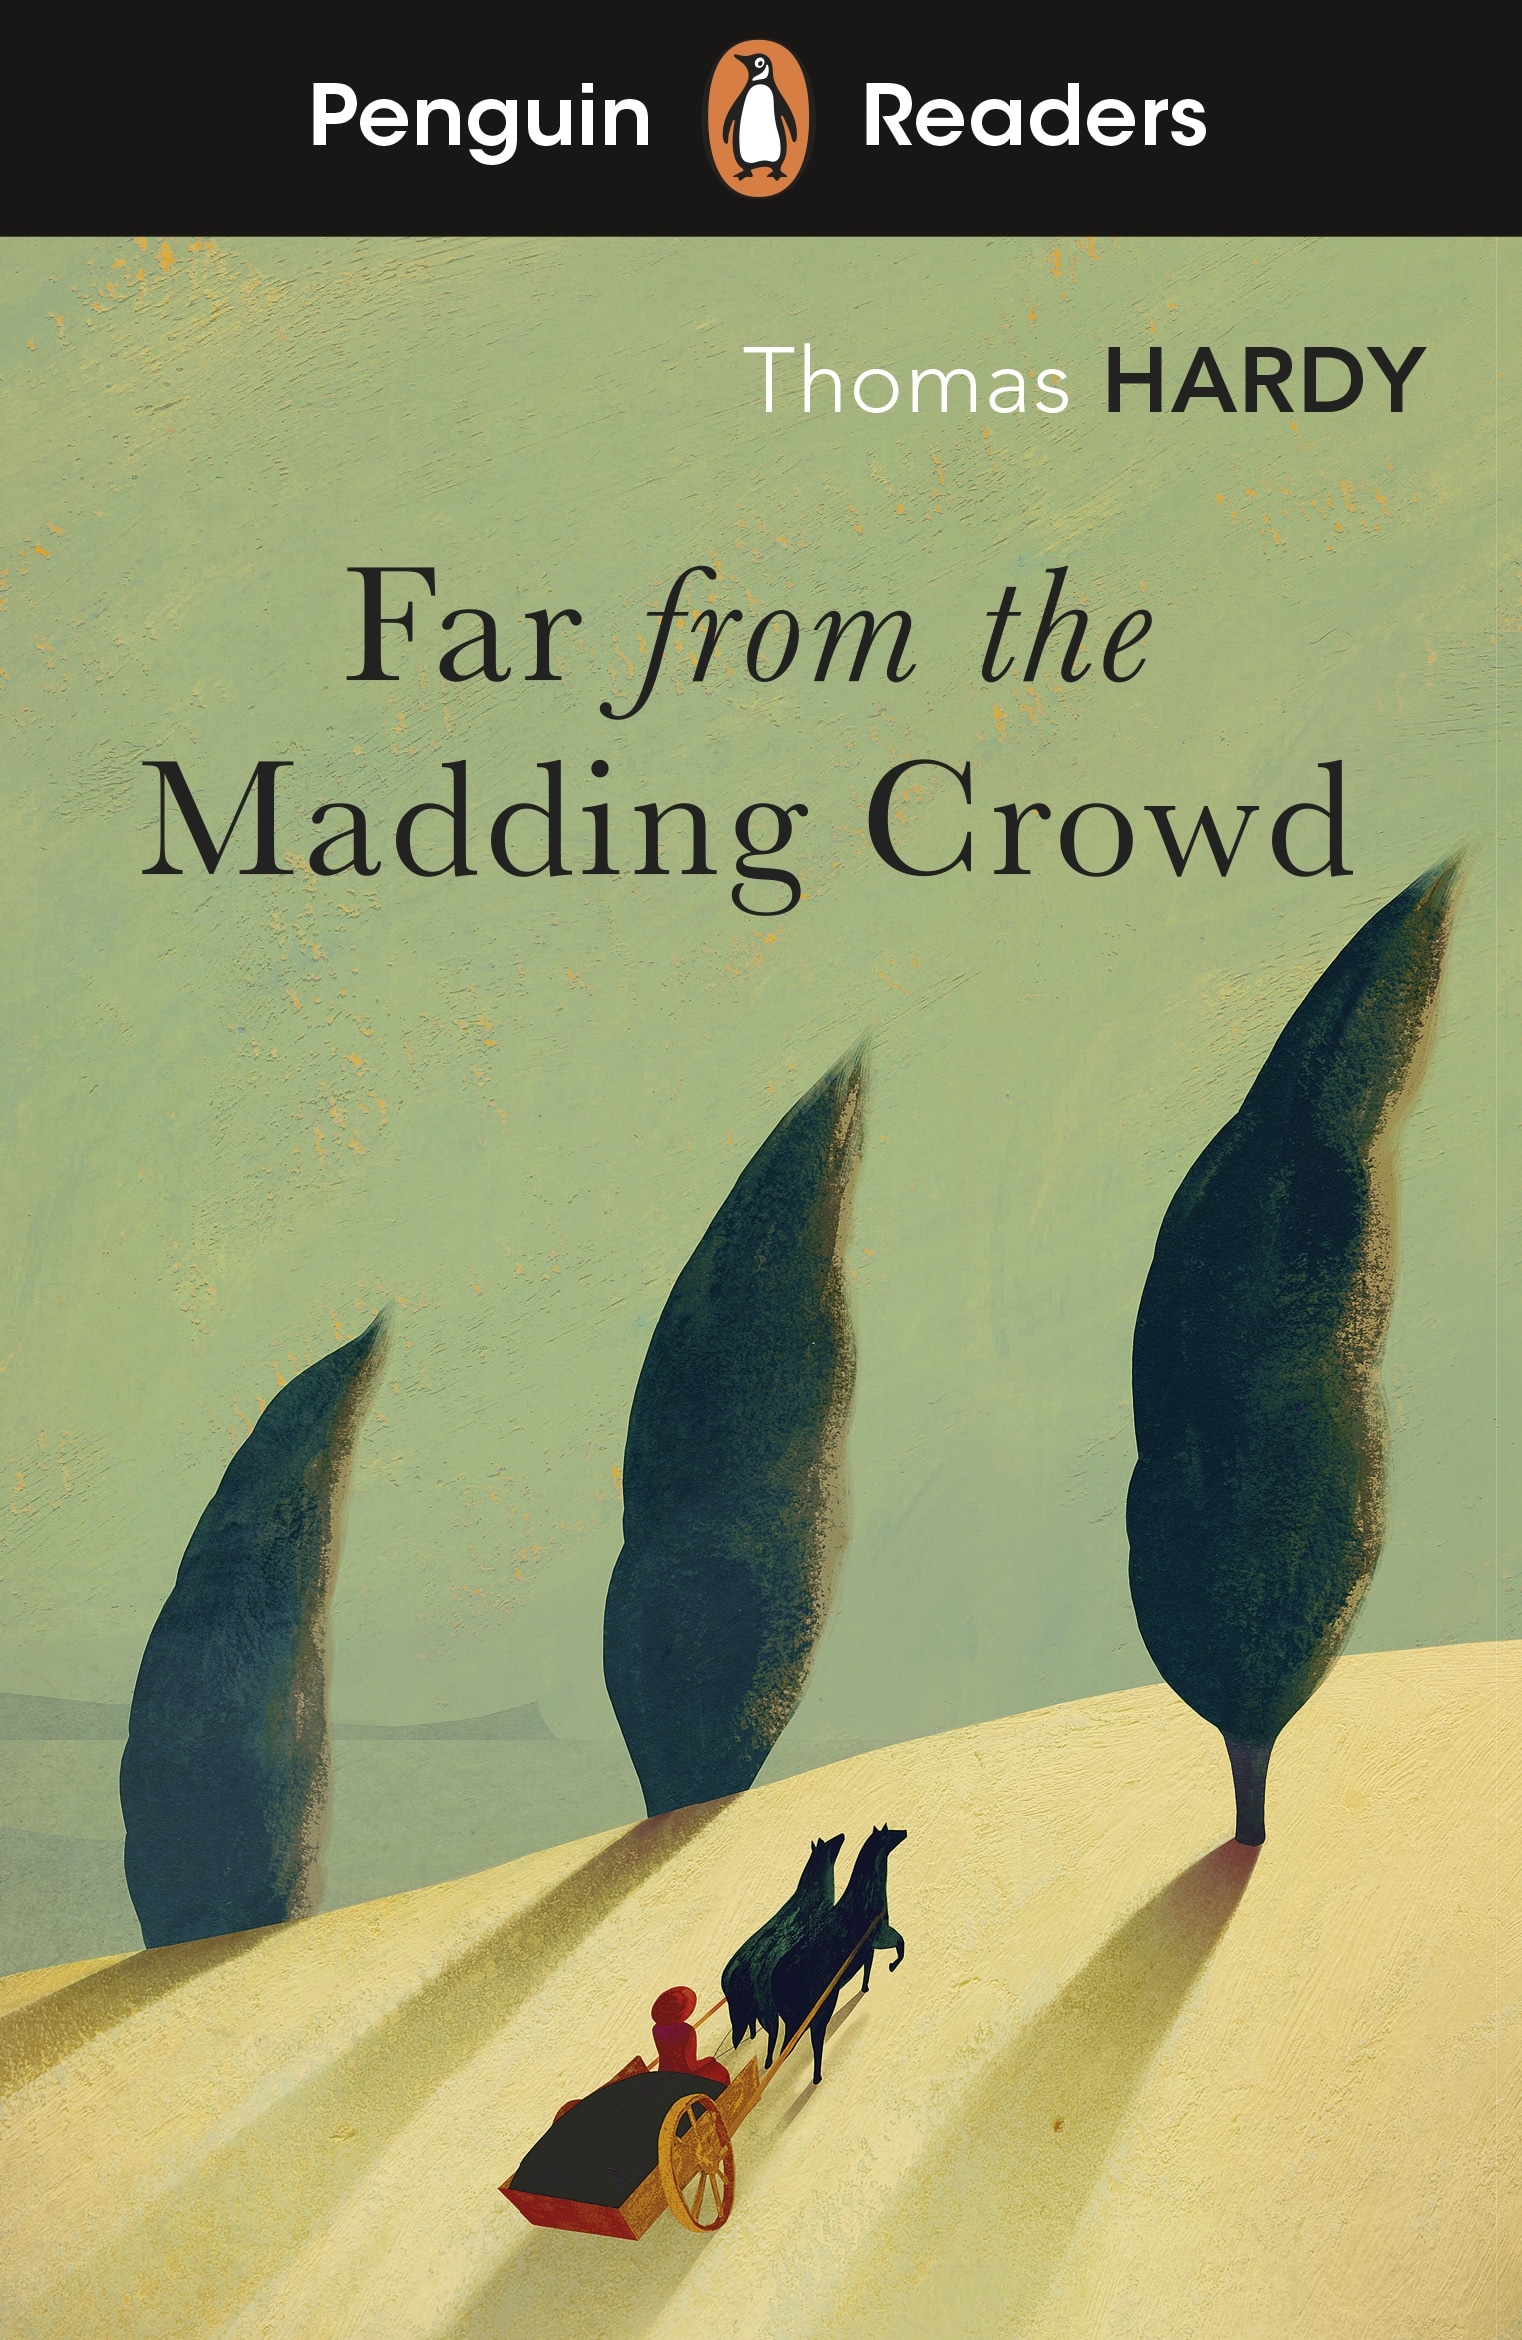 Book “Penguin Readers Level 5: Far from the Madding Crowd (ELT Graded Reader)” by Thomas Hardy — November 5, 2020